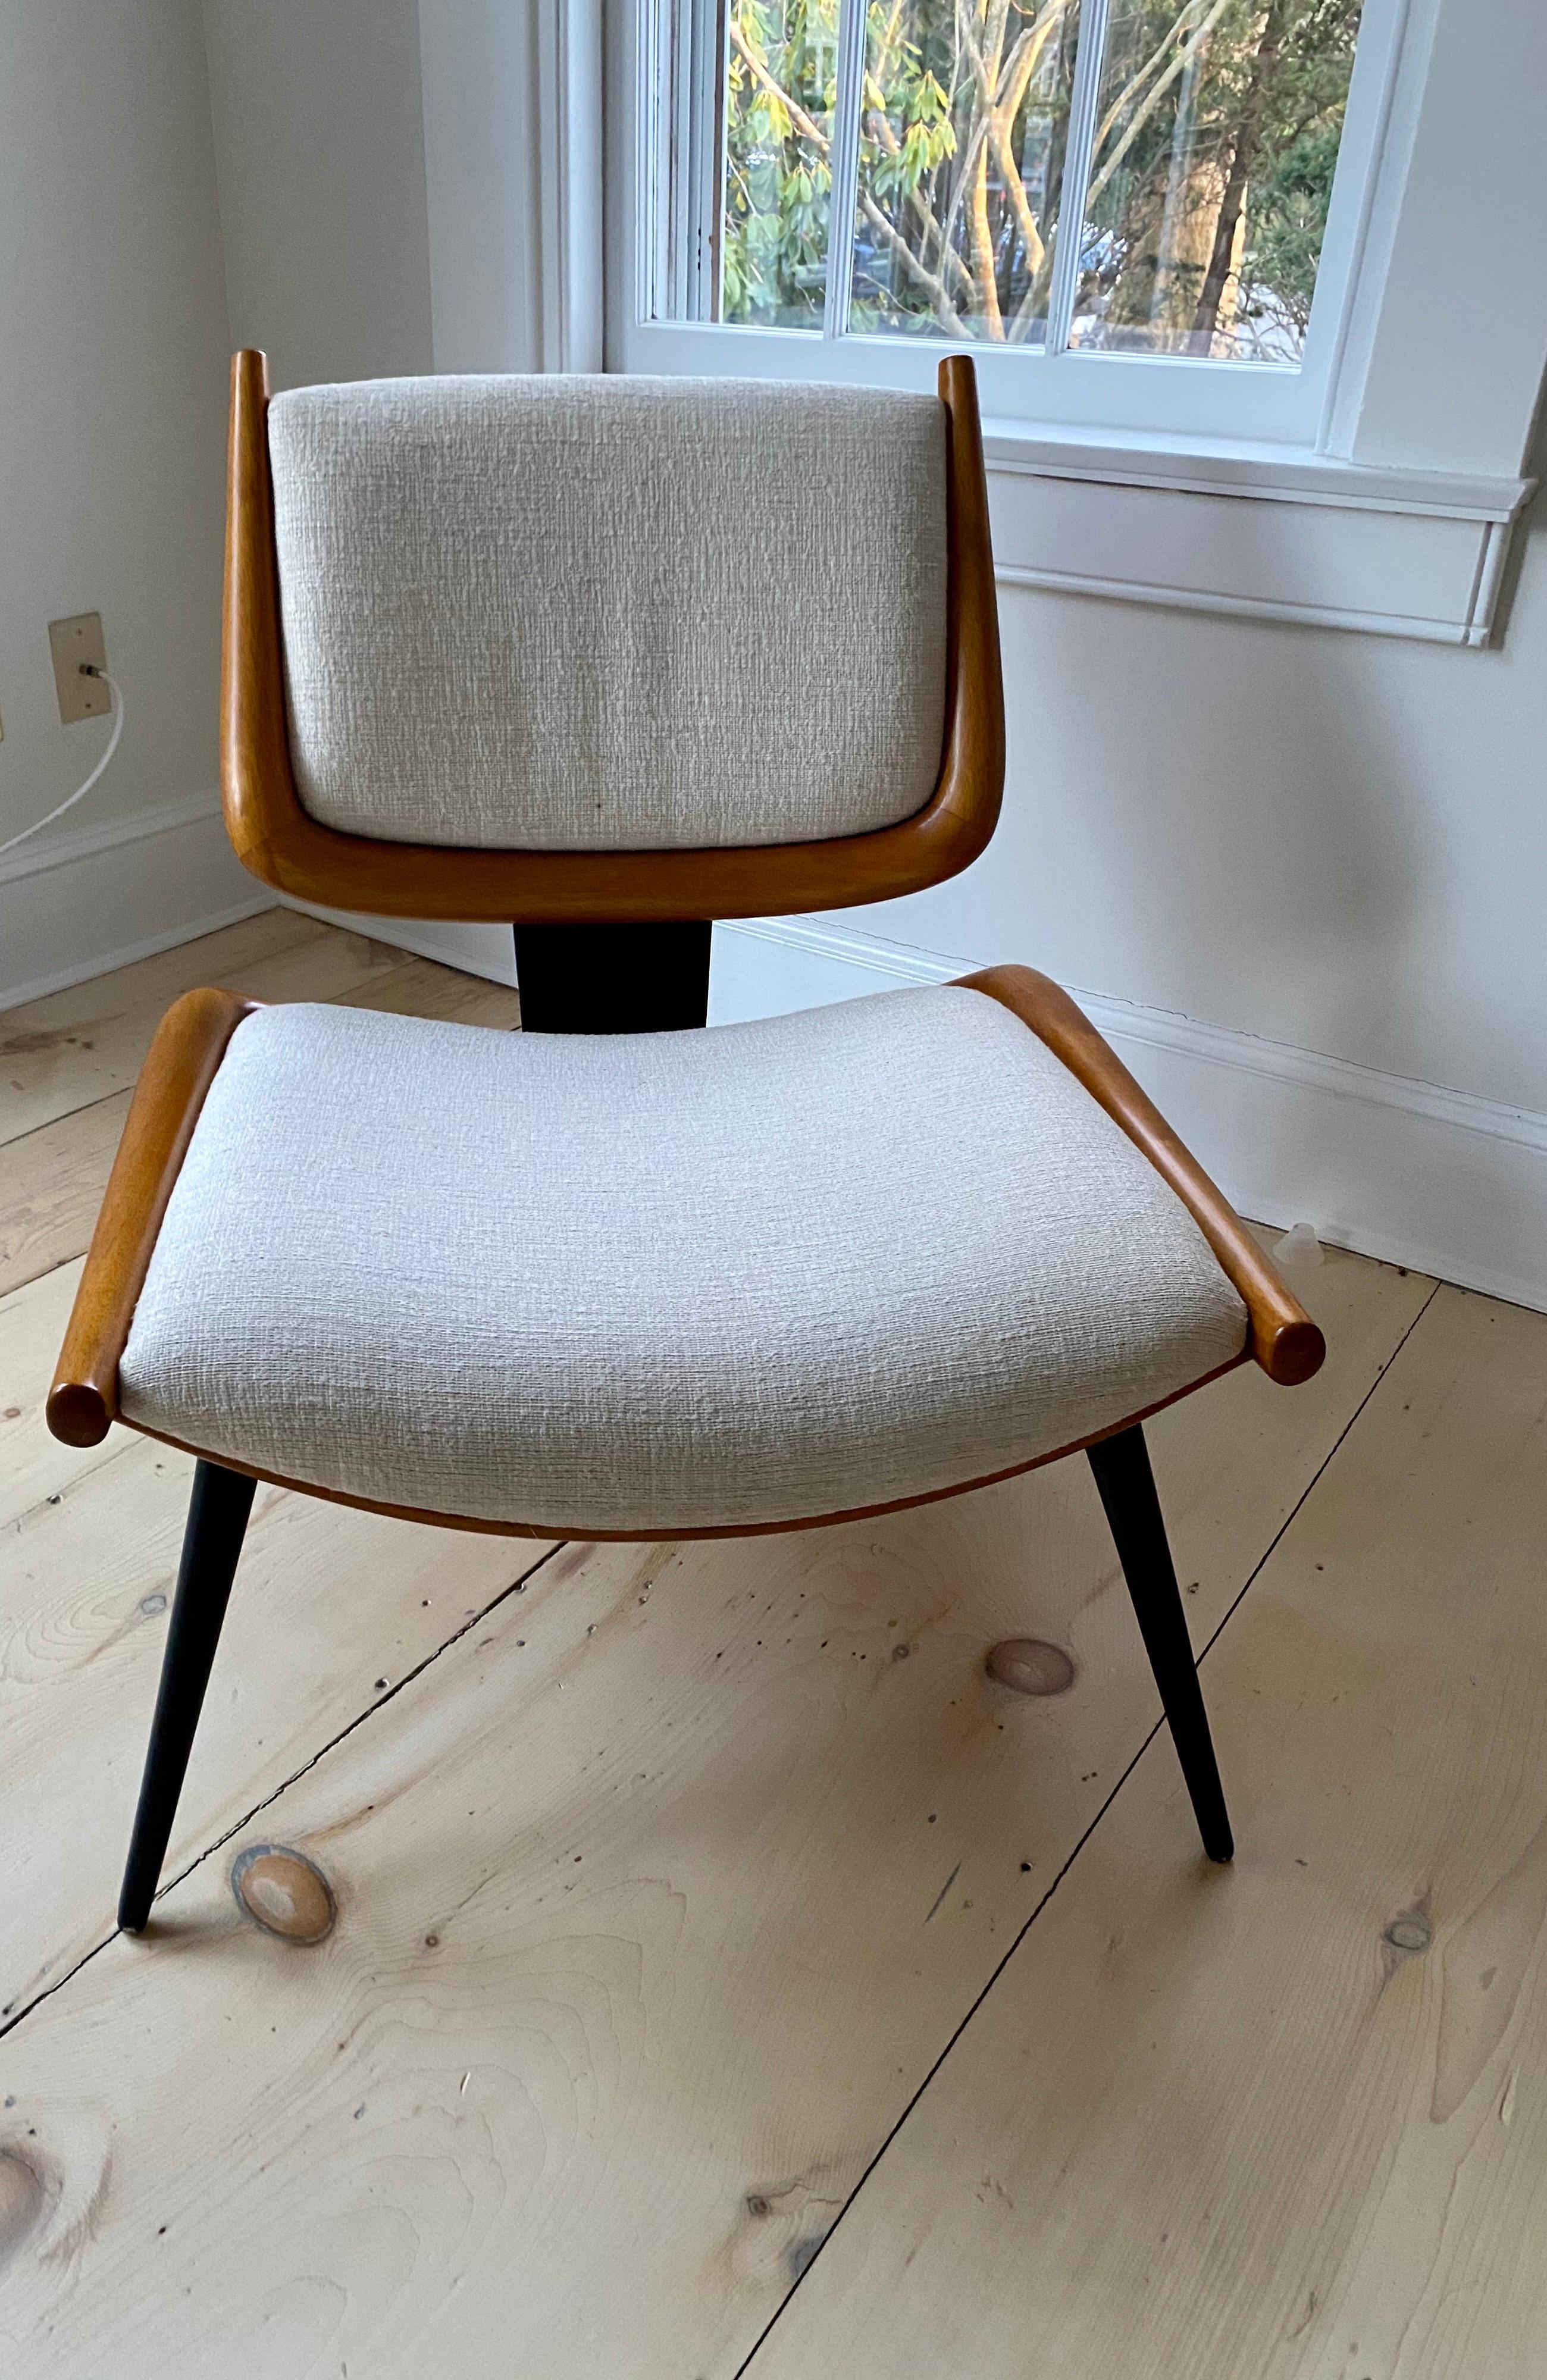 No longer being produced, this chair by Jonathan Adler has elements of midcentury European design but has proportions that do not compromise comfort. It is crafted from wood, sanded and oiled to reveal its natural beauty, joined to a blackened steel